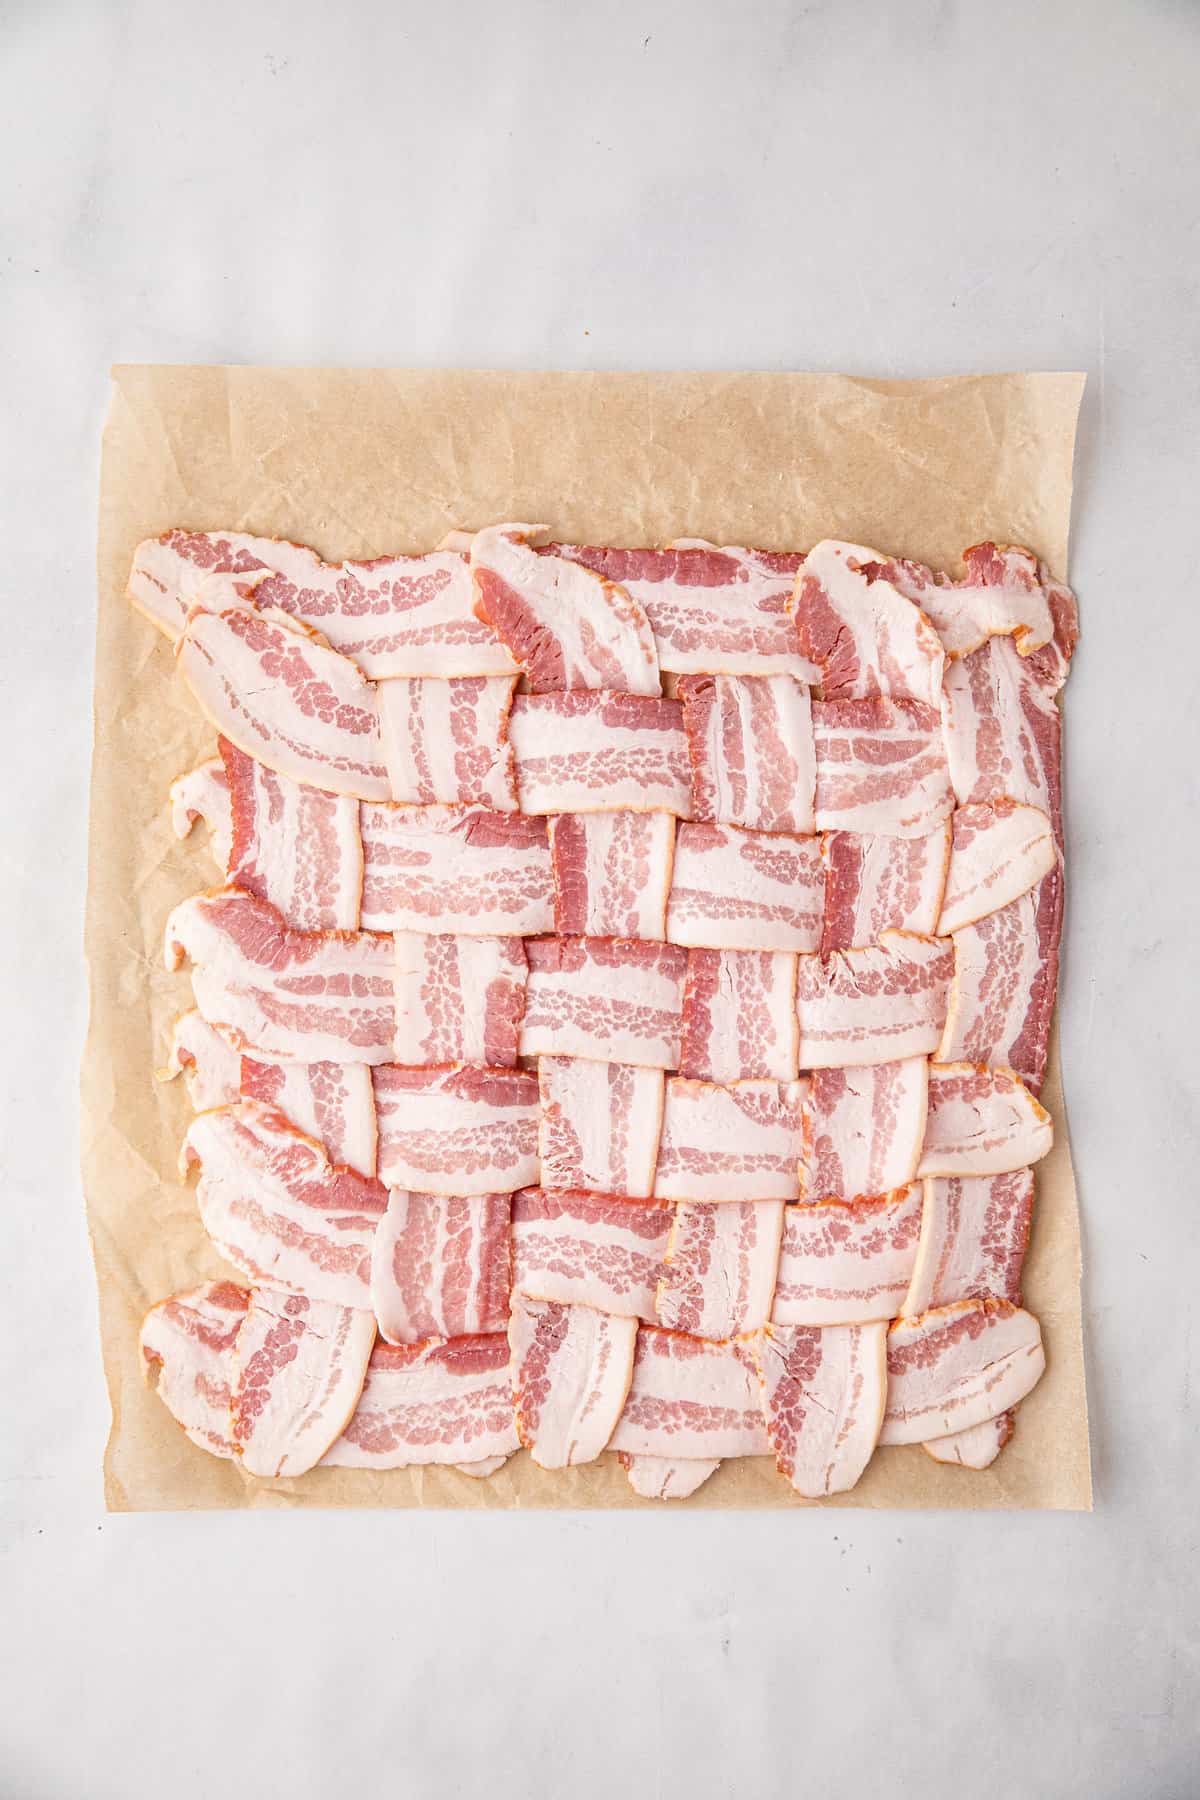 Bacon weaved on cooking paper for Bacon Explosion recipe